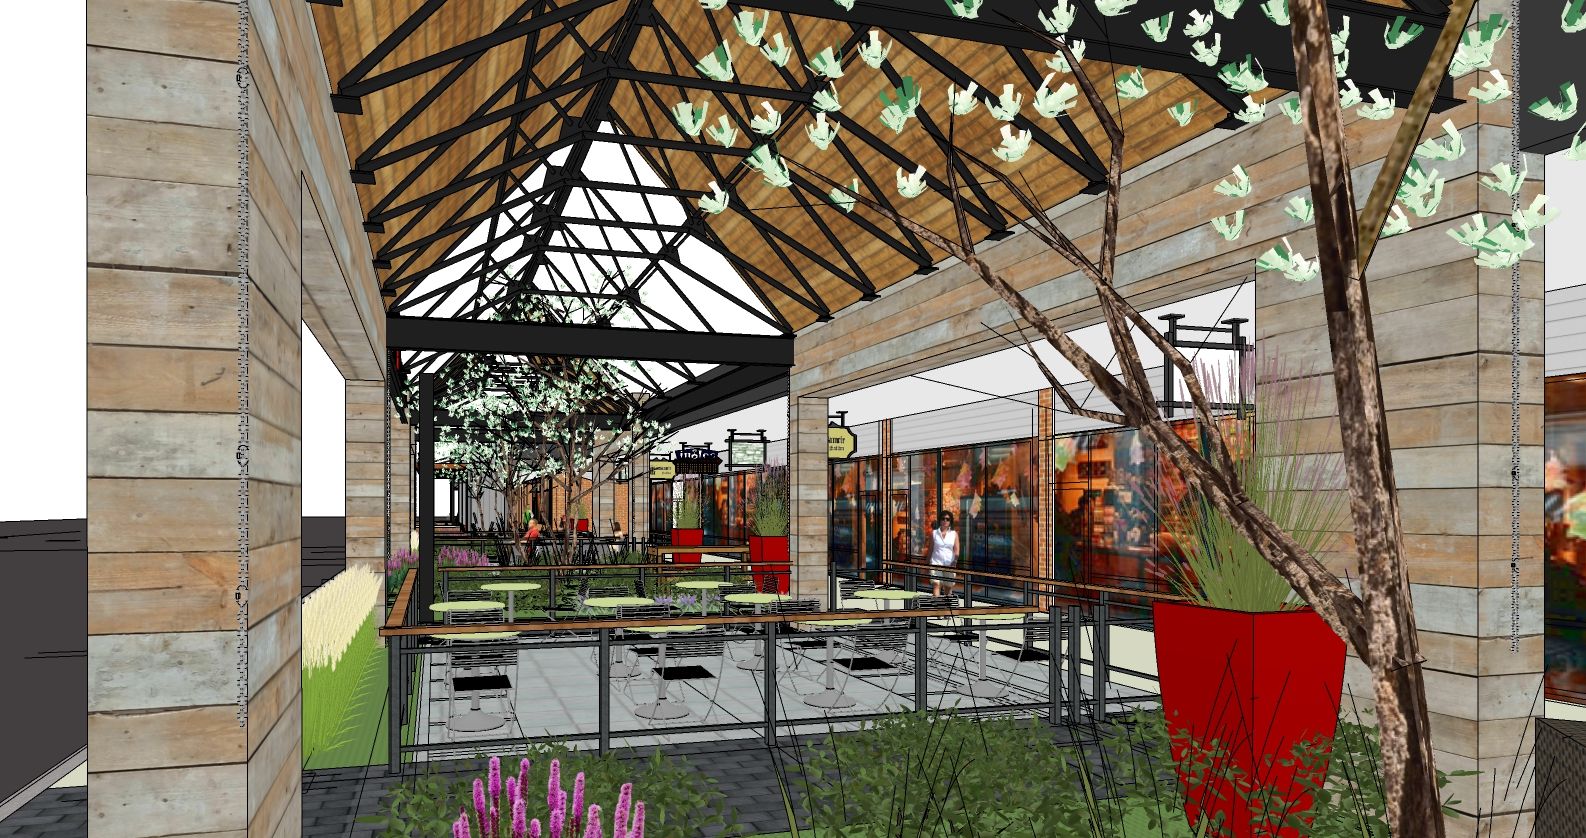 The center's renovation will include a double-sided outdoor fireplace and a communal village design, with new storefronts and signs, wider sidewalks, new landscaping and pavilions. (Courtesy Federal Realty Investment Trust)